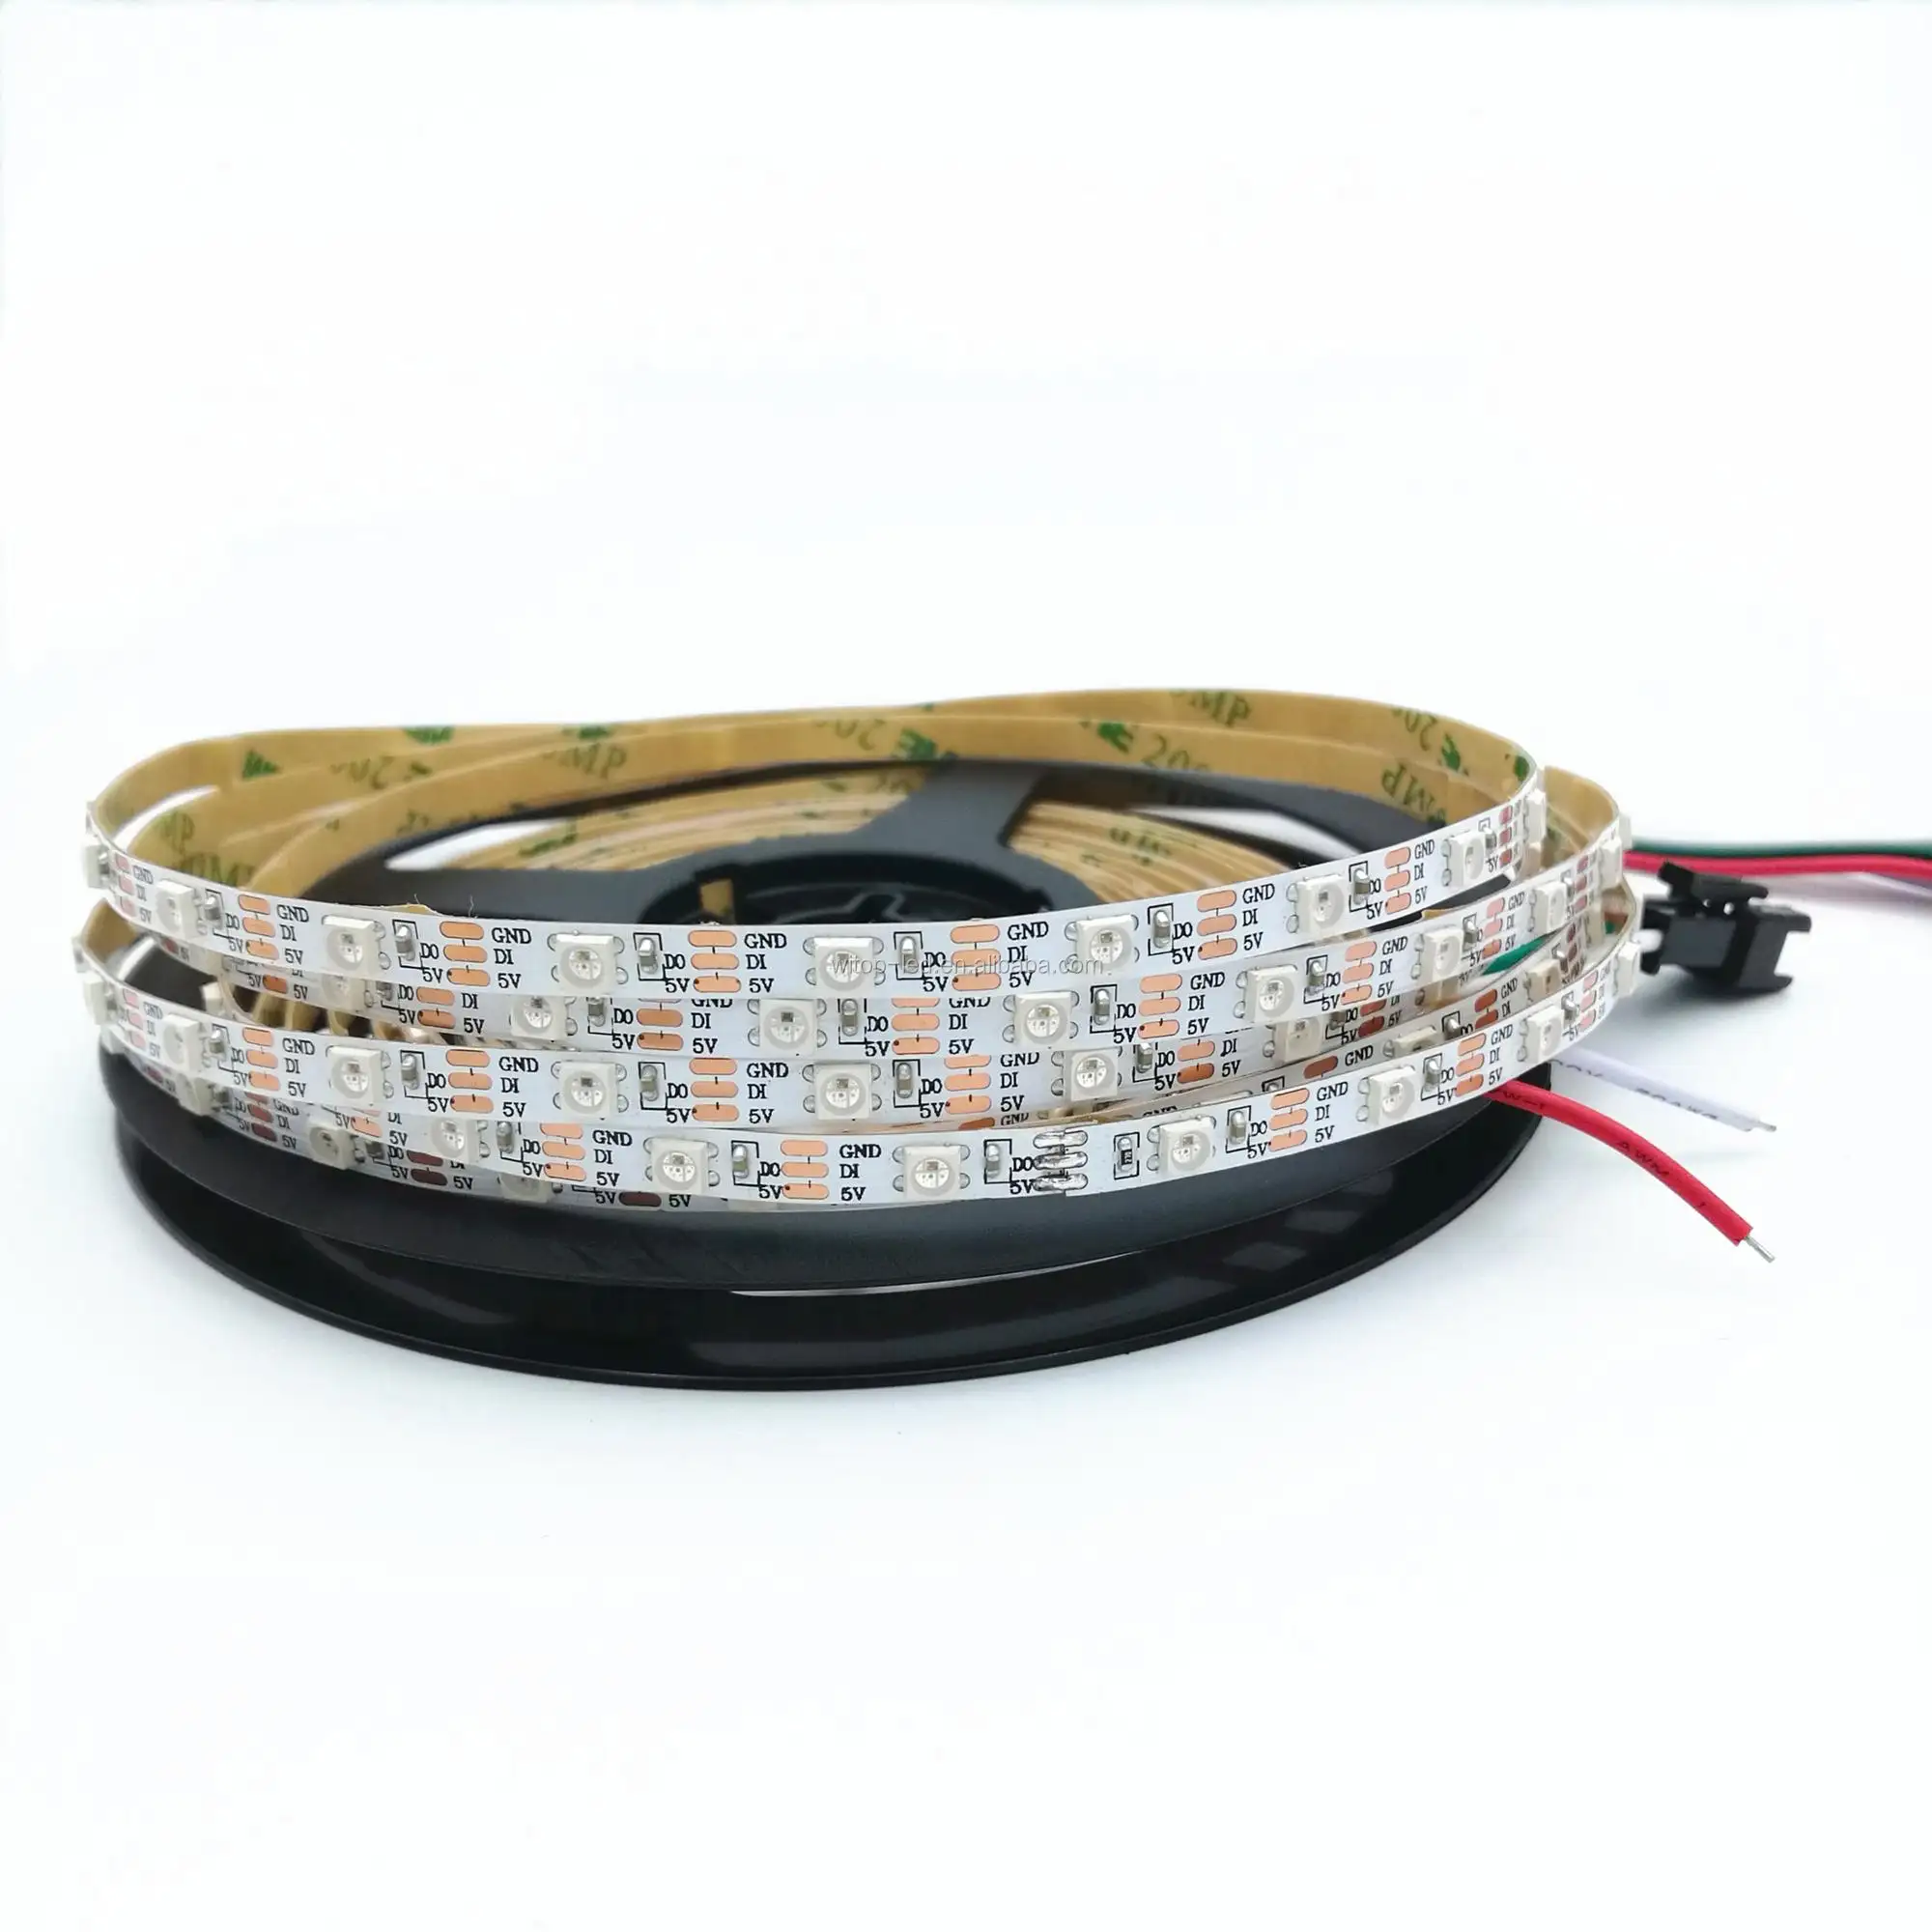 Alibaba China Manufacturer Buit-in IC WS2812B/SK6812 Mini RGB SMD Addressable 3535 LED Strip